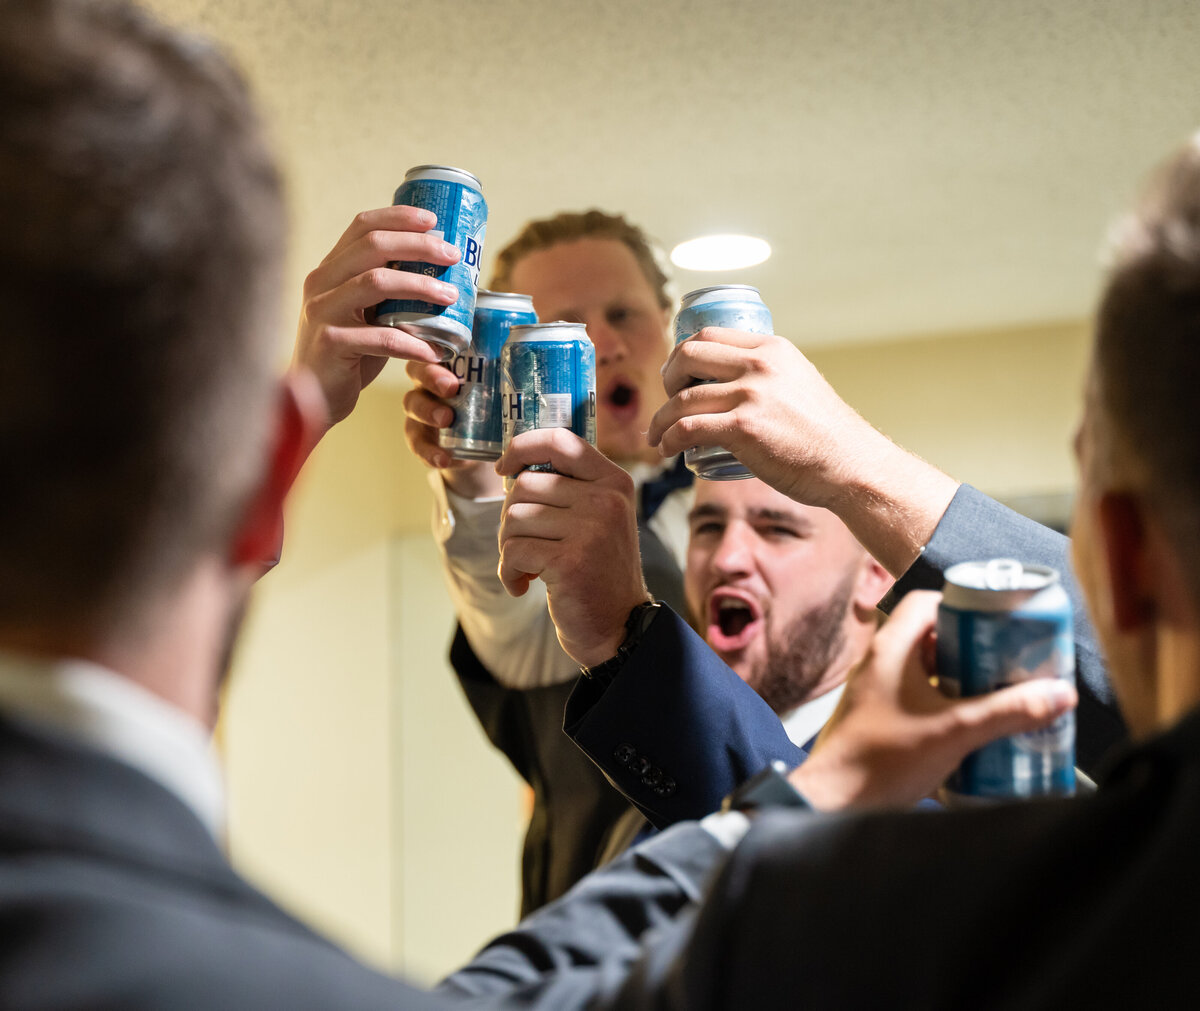 The groom, Ryan Bee, and his groomsmen cheers with Busch Light at their hotel in Canal Winchester, Ohio, in celebration of Ryan's wedding day.